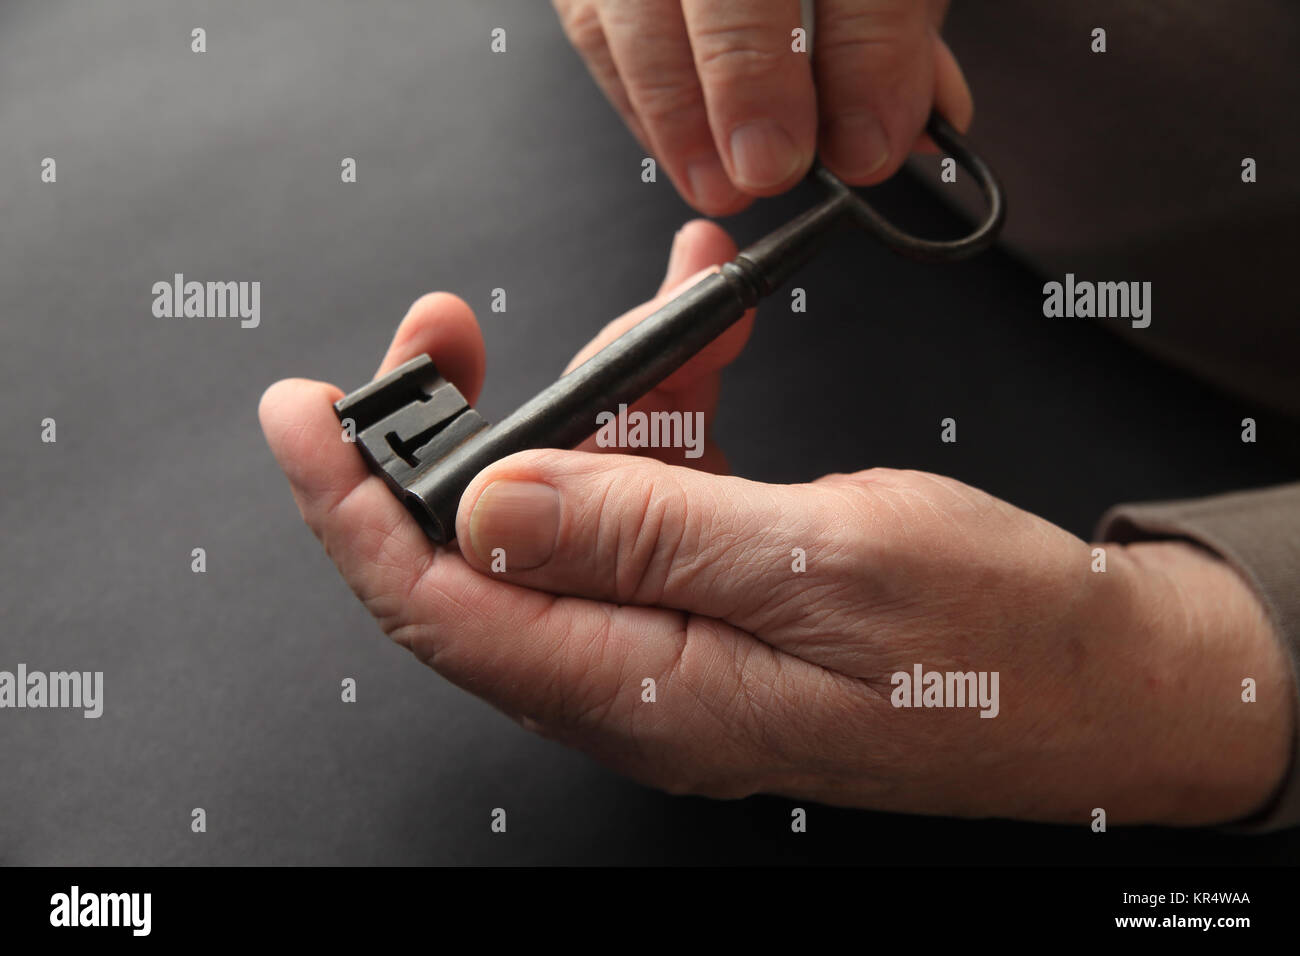 Man holding a vintage key with copy space Stock Photo